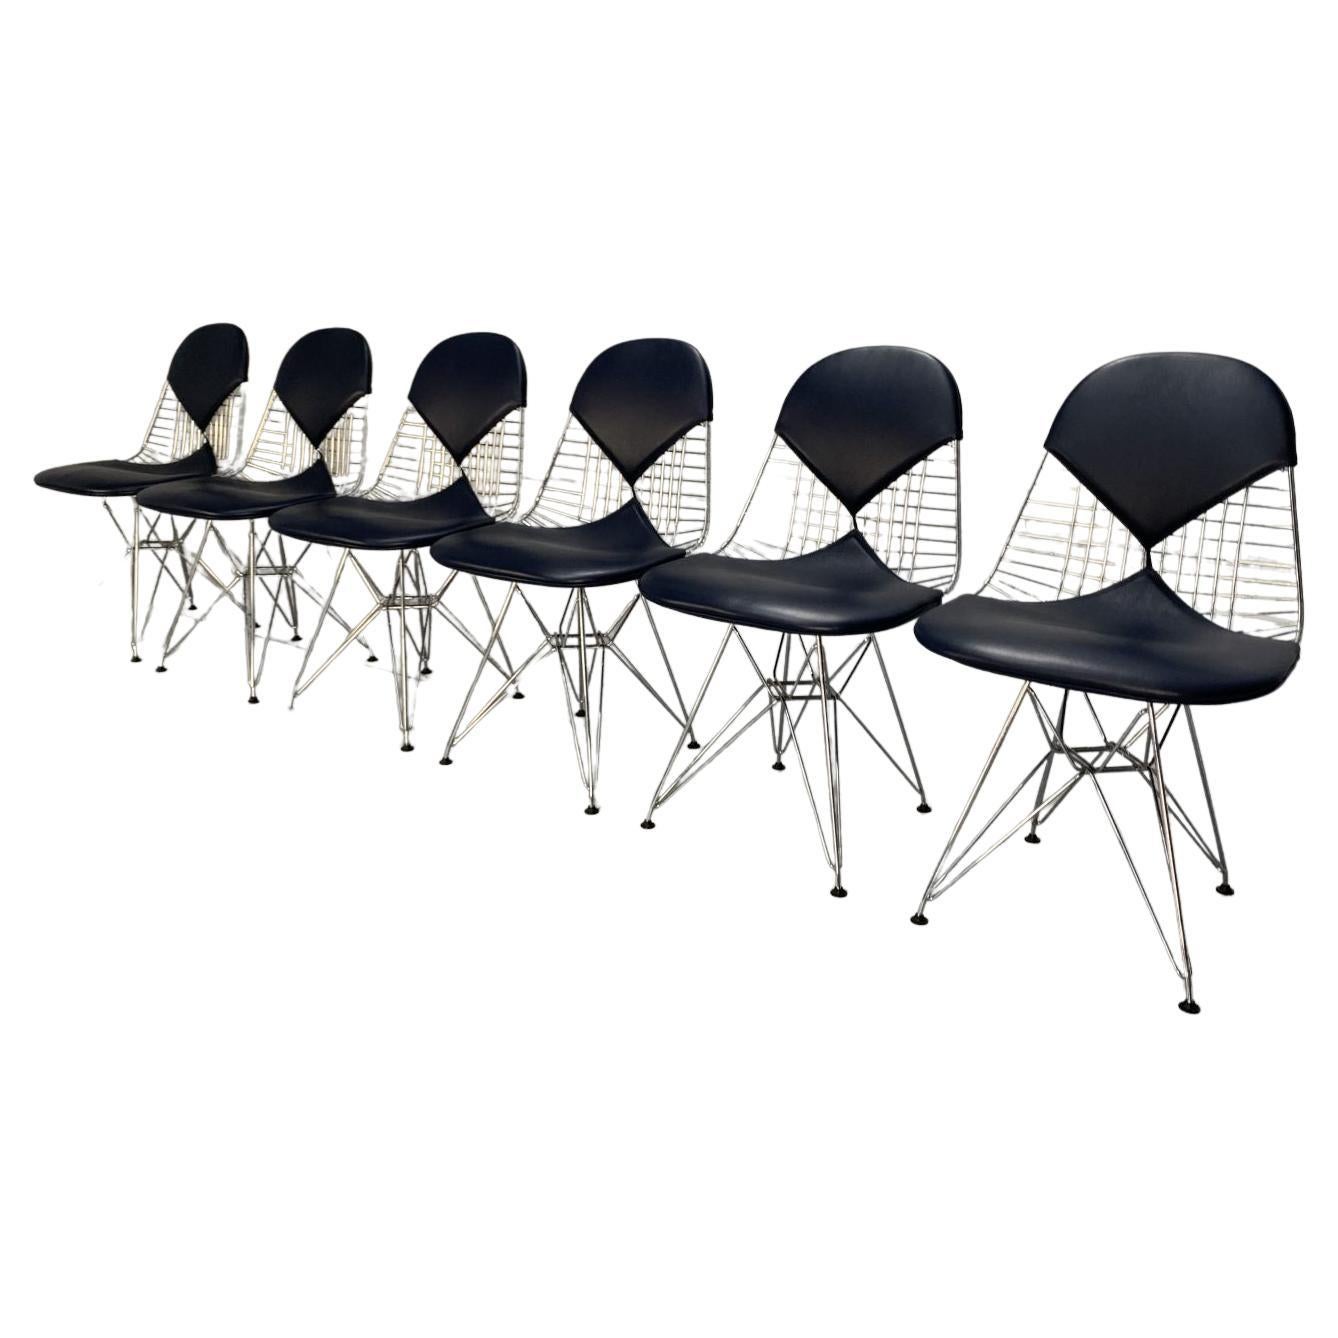 Suite of 6 Vitra “Eames DKR-2 Bikini” Chairs in Navy Blue Premium Leather For Sale